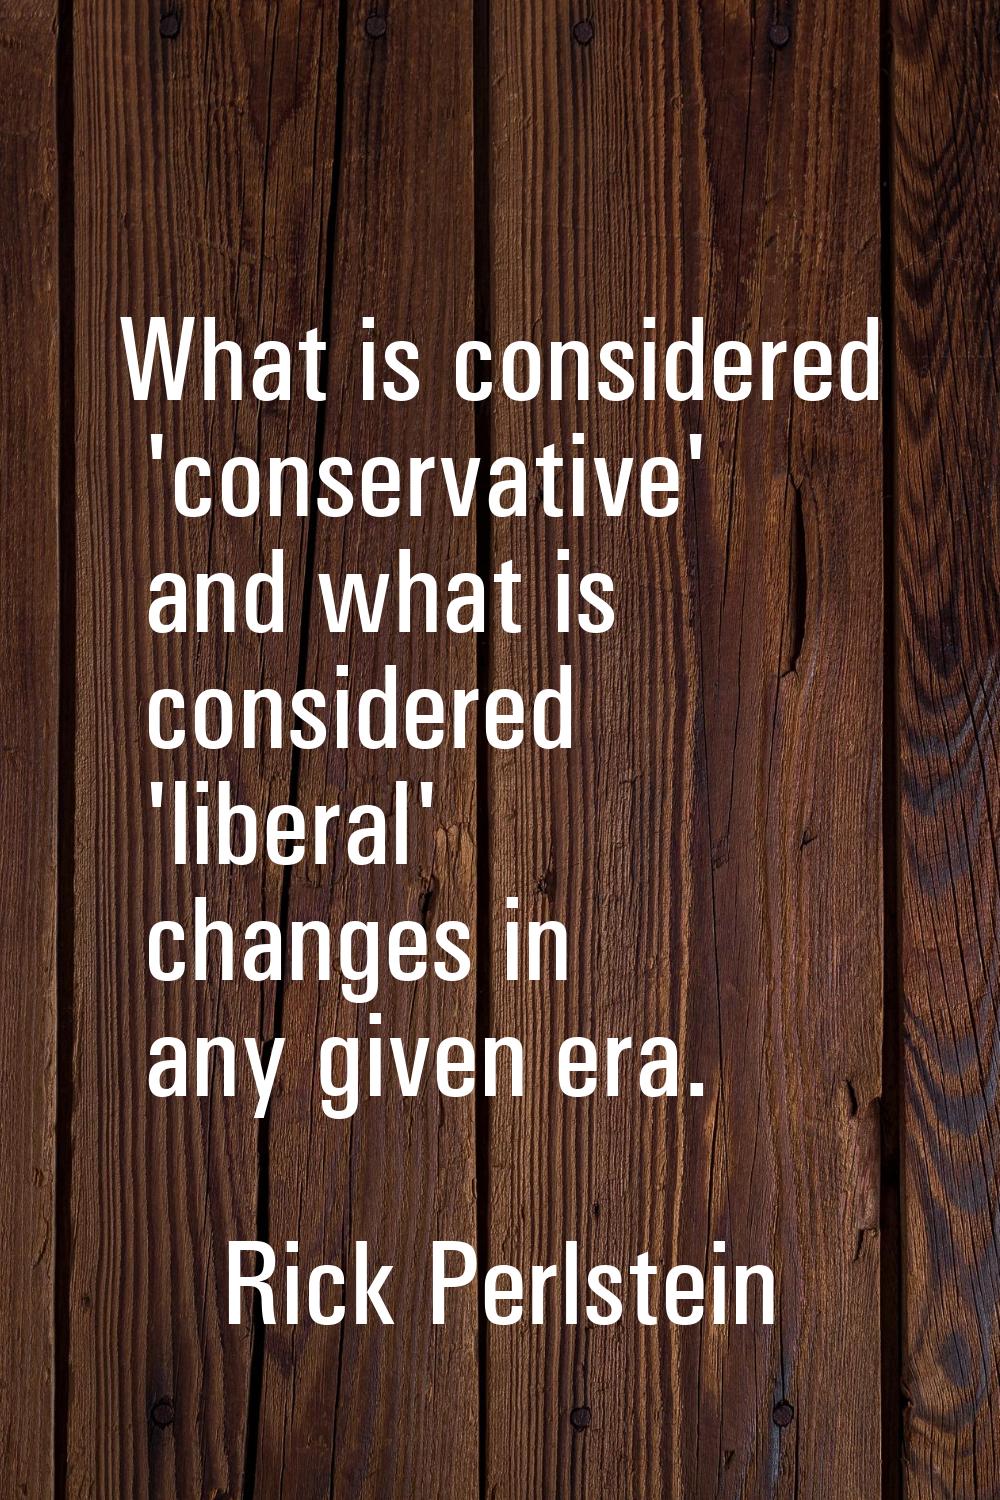 What is considered 'conservative' and what is considered 'liberal' changes in any given era.